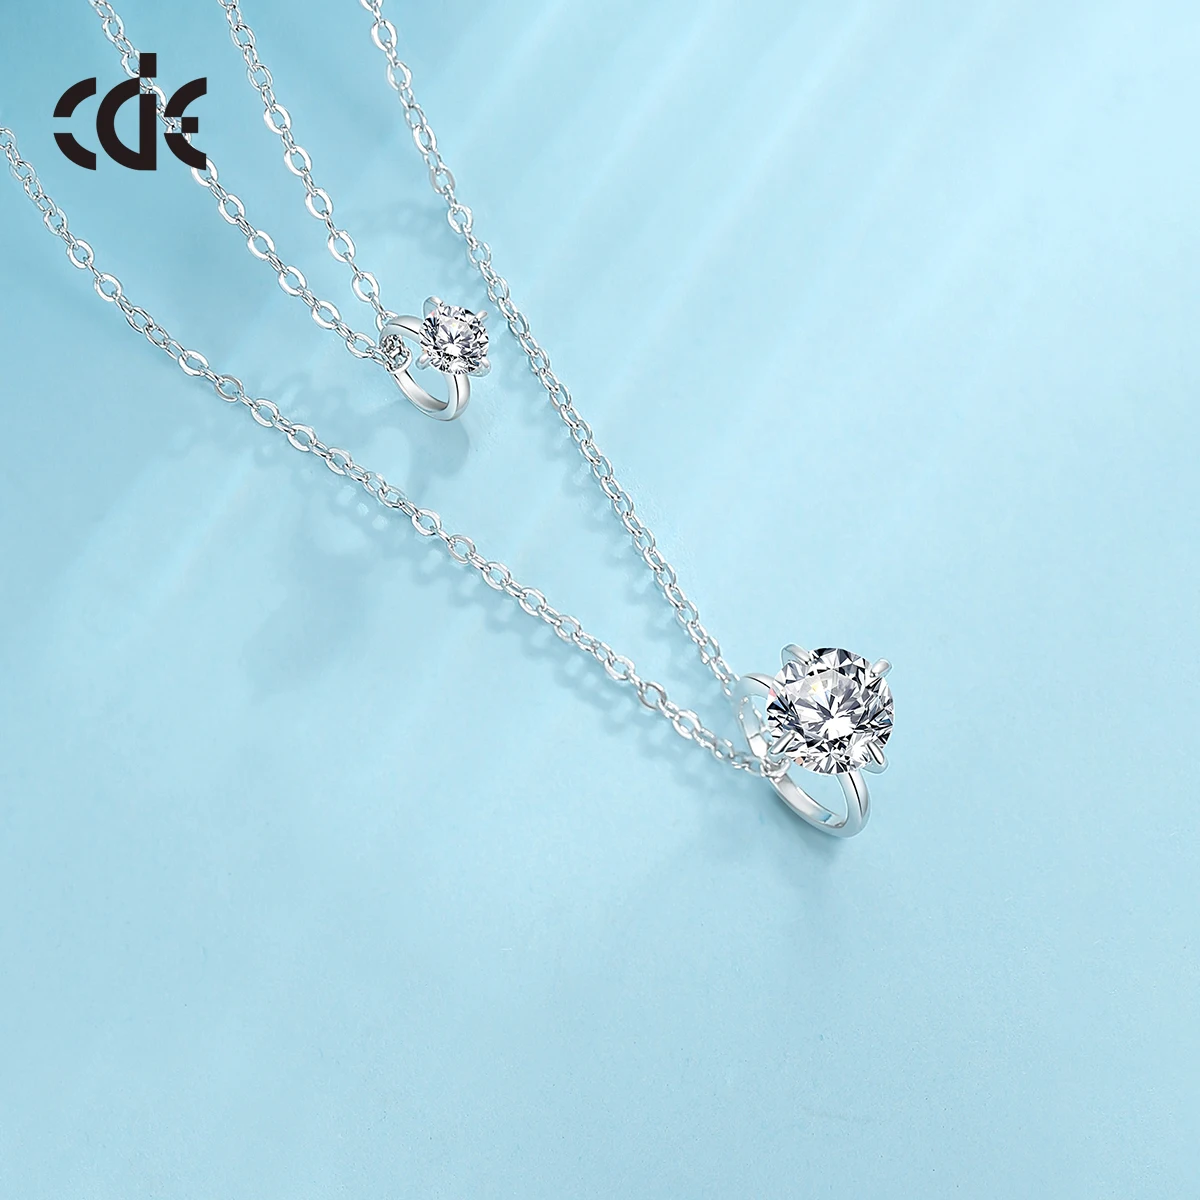 CDE CZYN031 Fine Jewelry Crafted 925 Sterling Silver Necklaces For Women Wholesale Bulk Double Chain  Ring Pendant Necklace